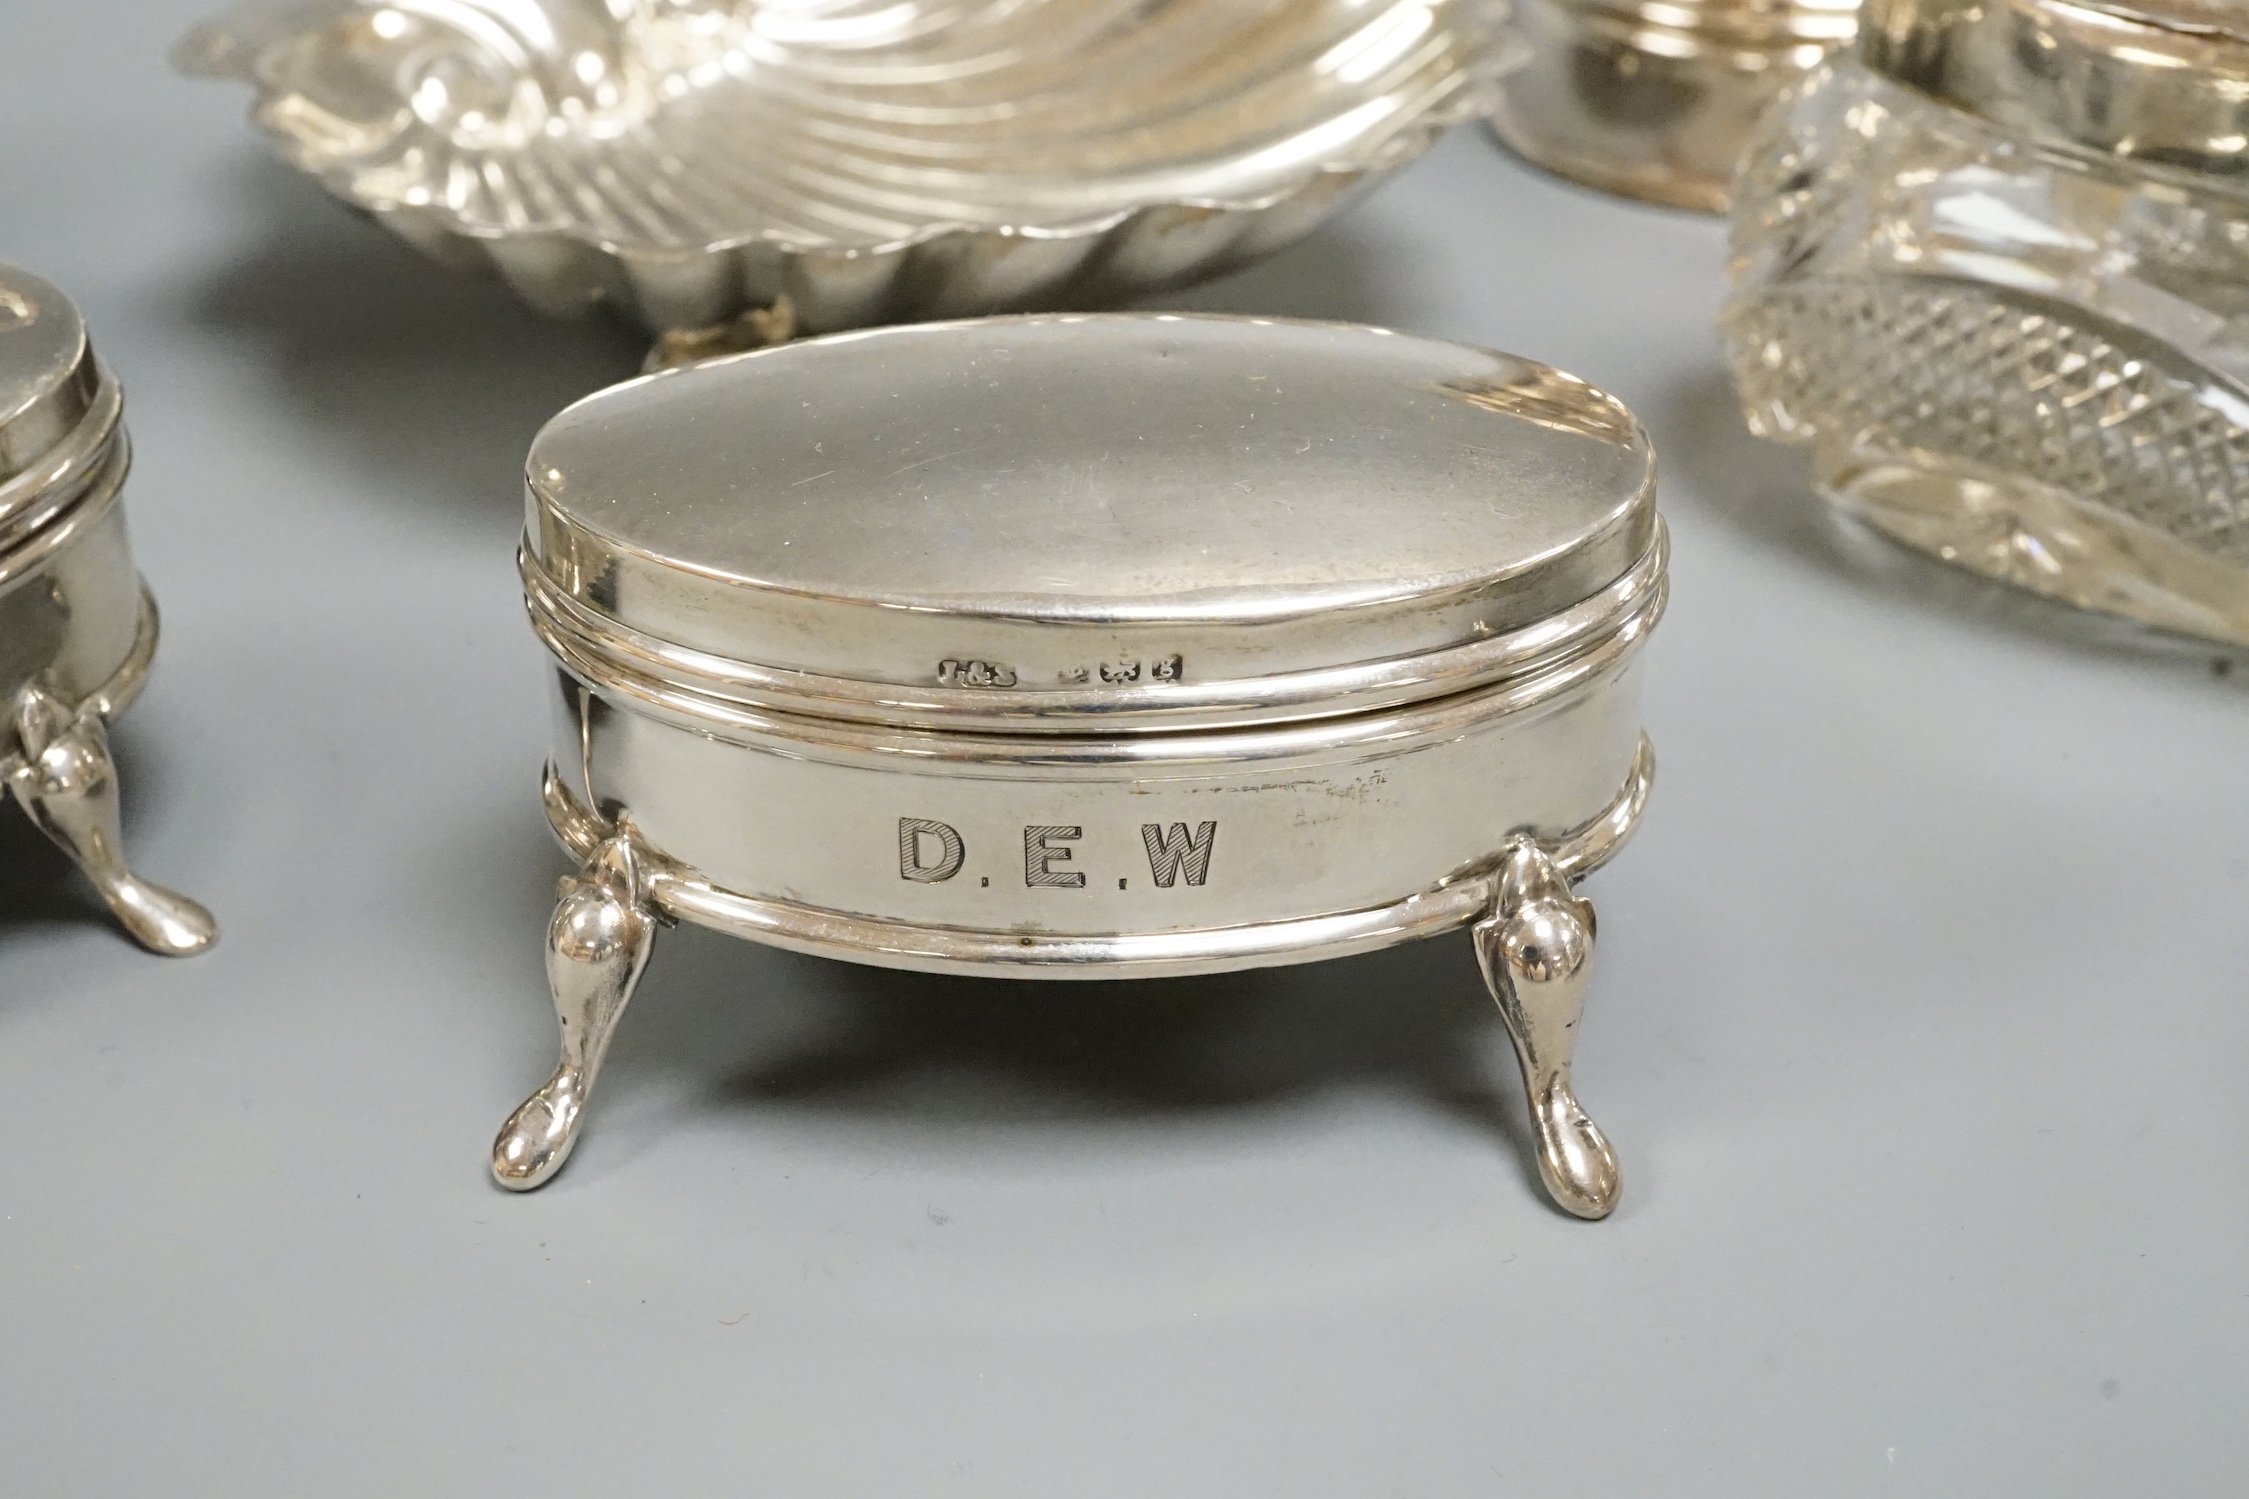 Sundry silver including cream and sugar, trinket boxes, butter shell, toilet jars, etc.